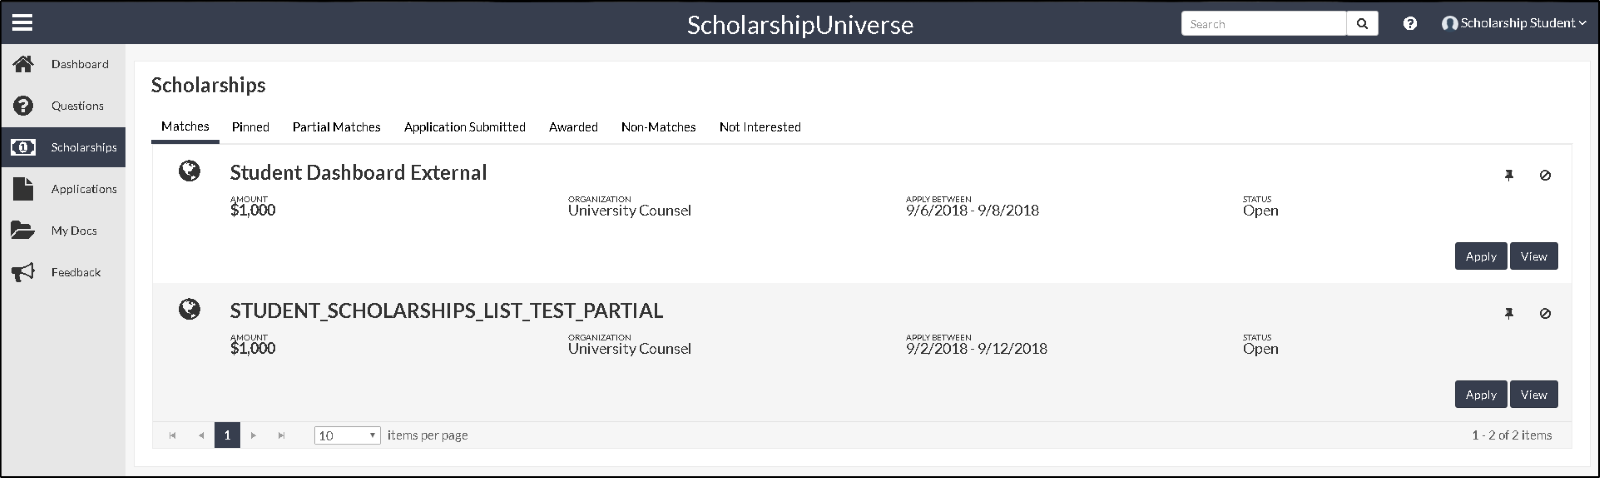 ScholarshipUniverse list of scholarships that you quality for.